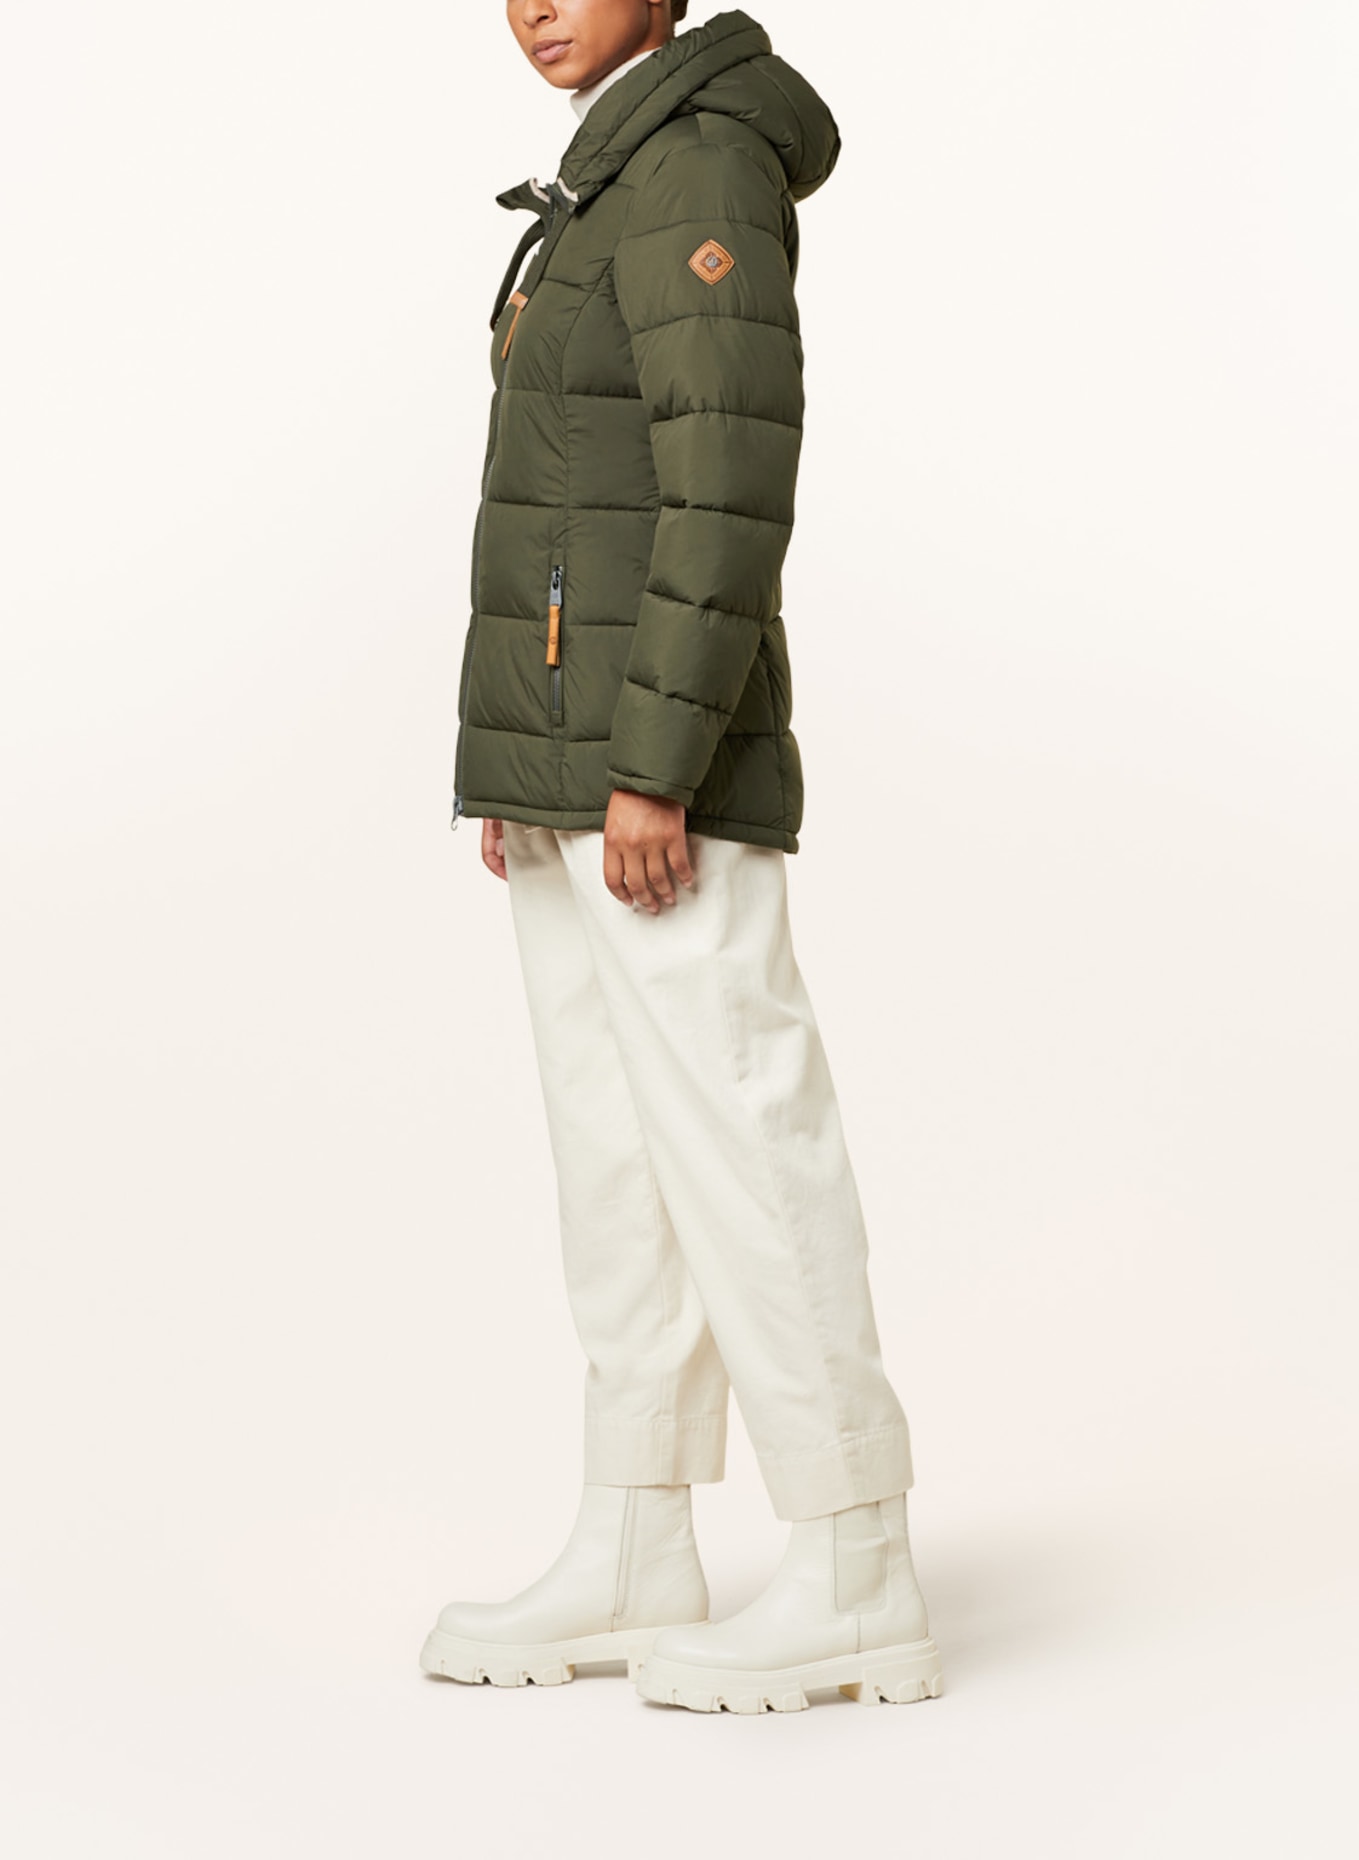 jacket G.I.G.A. Quilted killtec in olive by DX